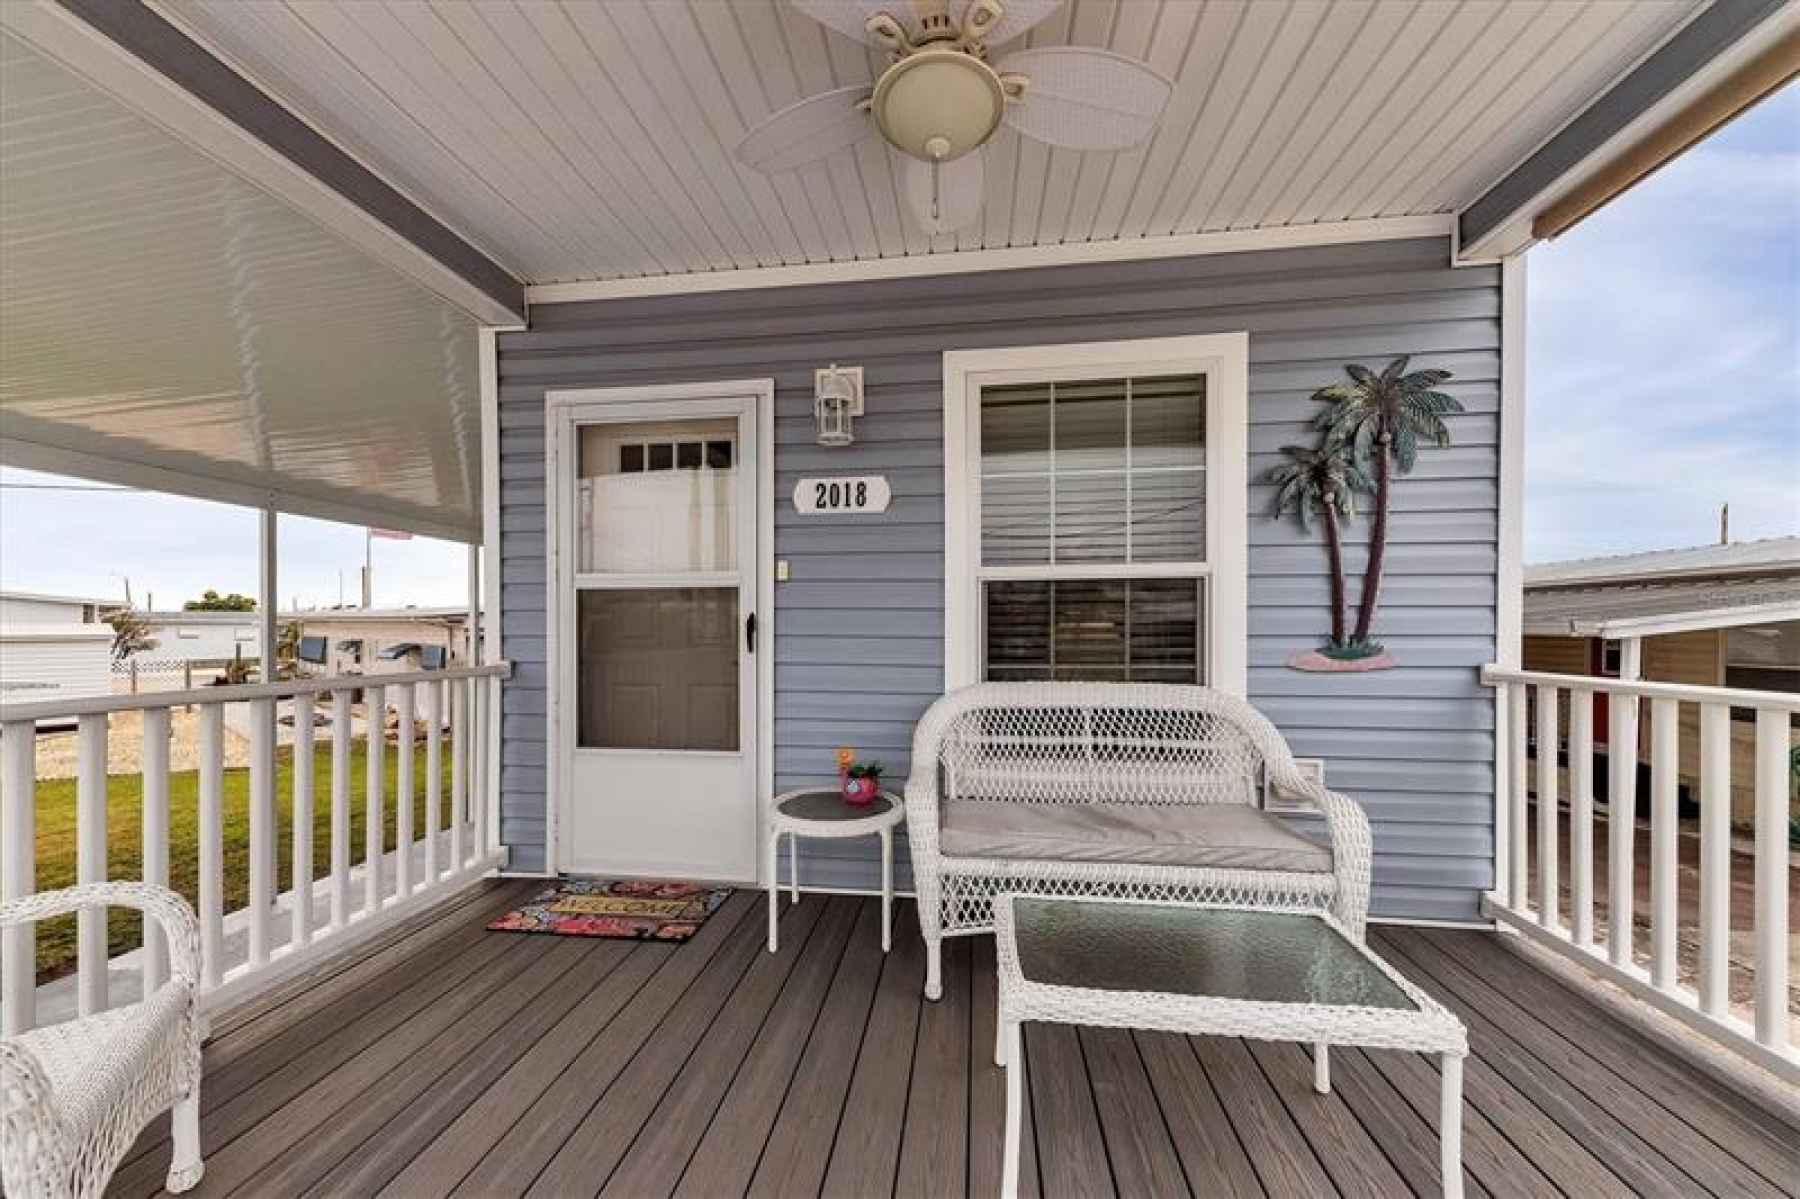 Large, covered front porch